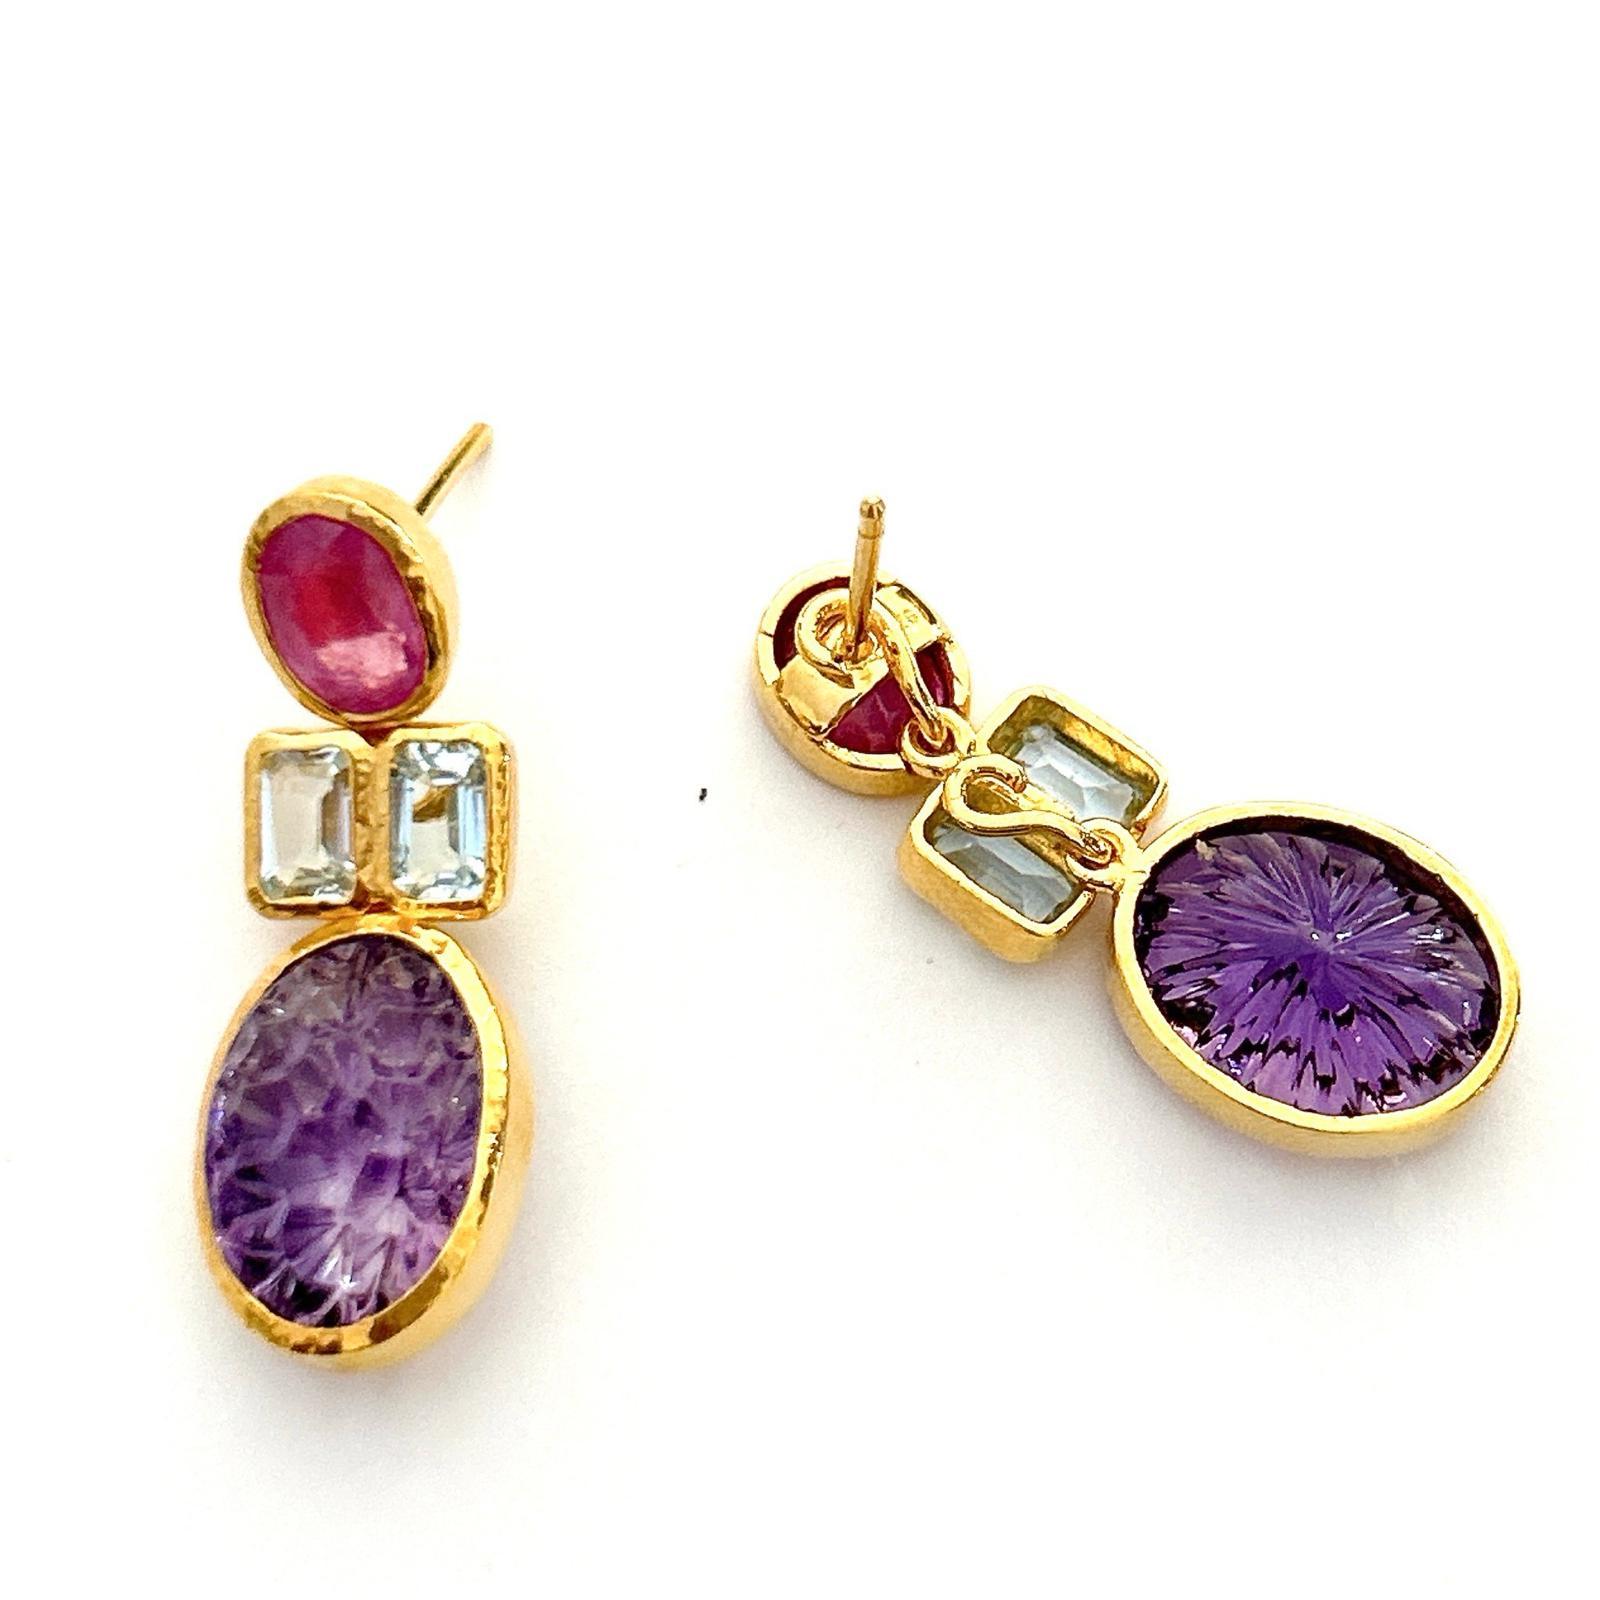 Bochic “Orient” Ruby & Topaz & Carved Amethyst Earrings Set In 18K & Silver  In New Condition For Sale In New York, NY